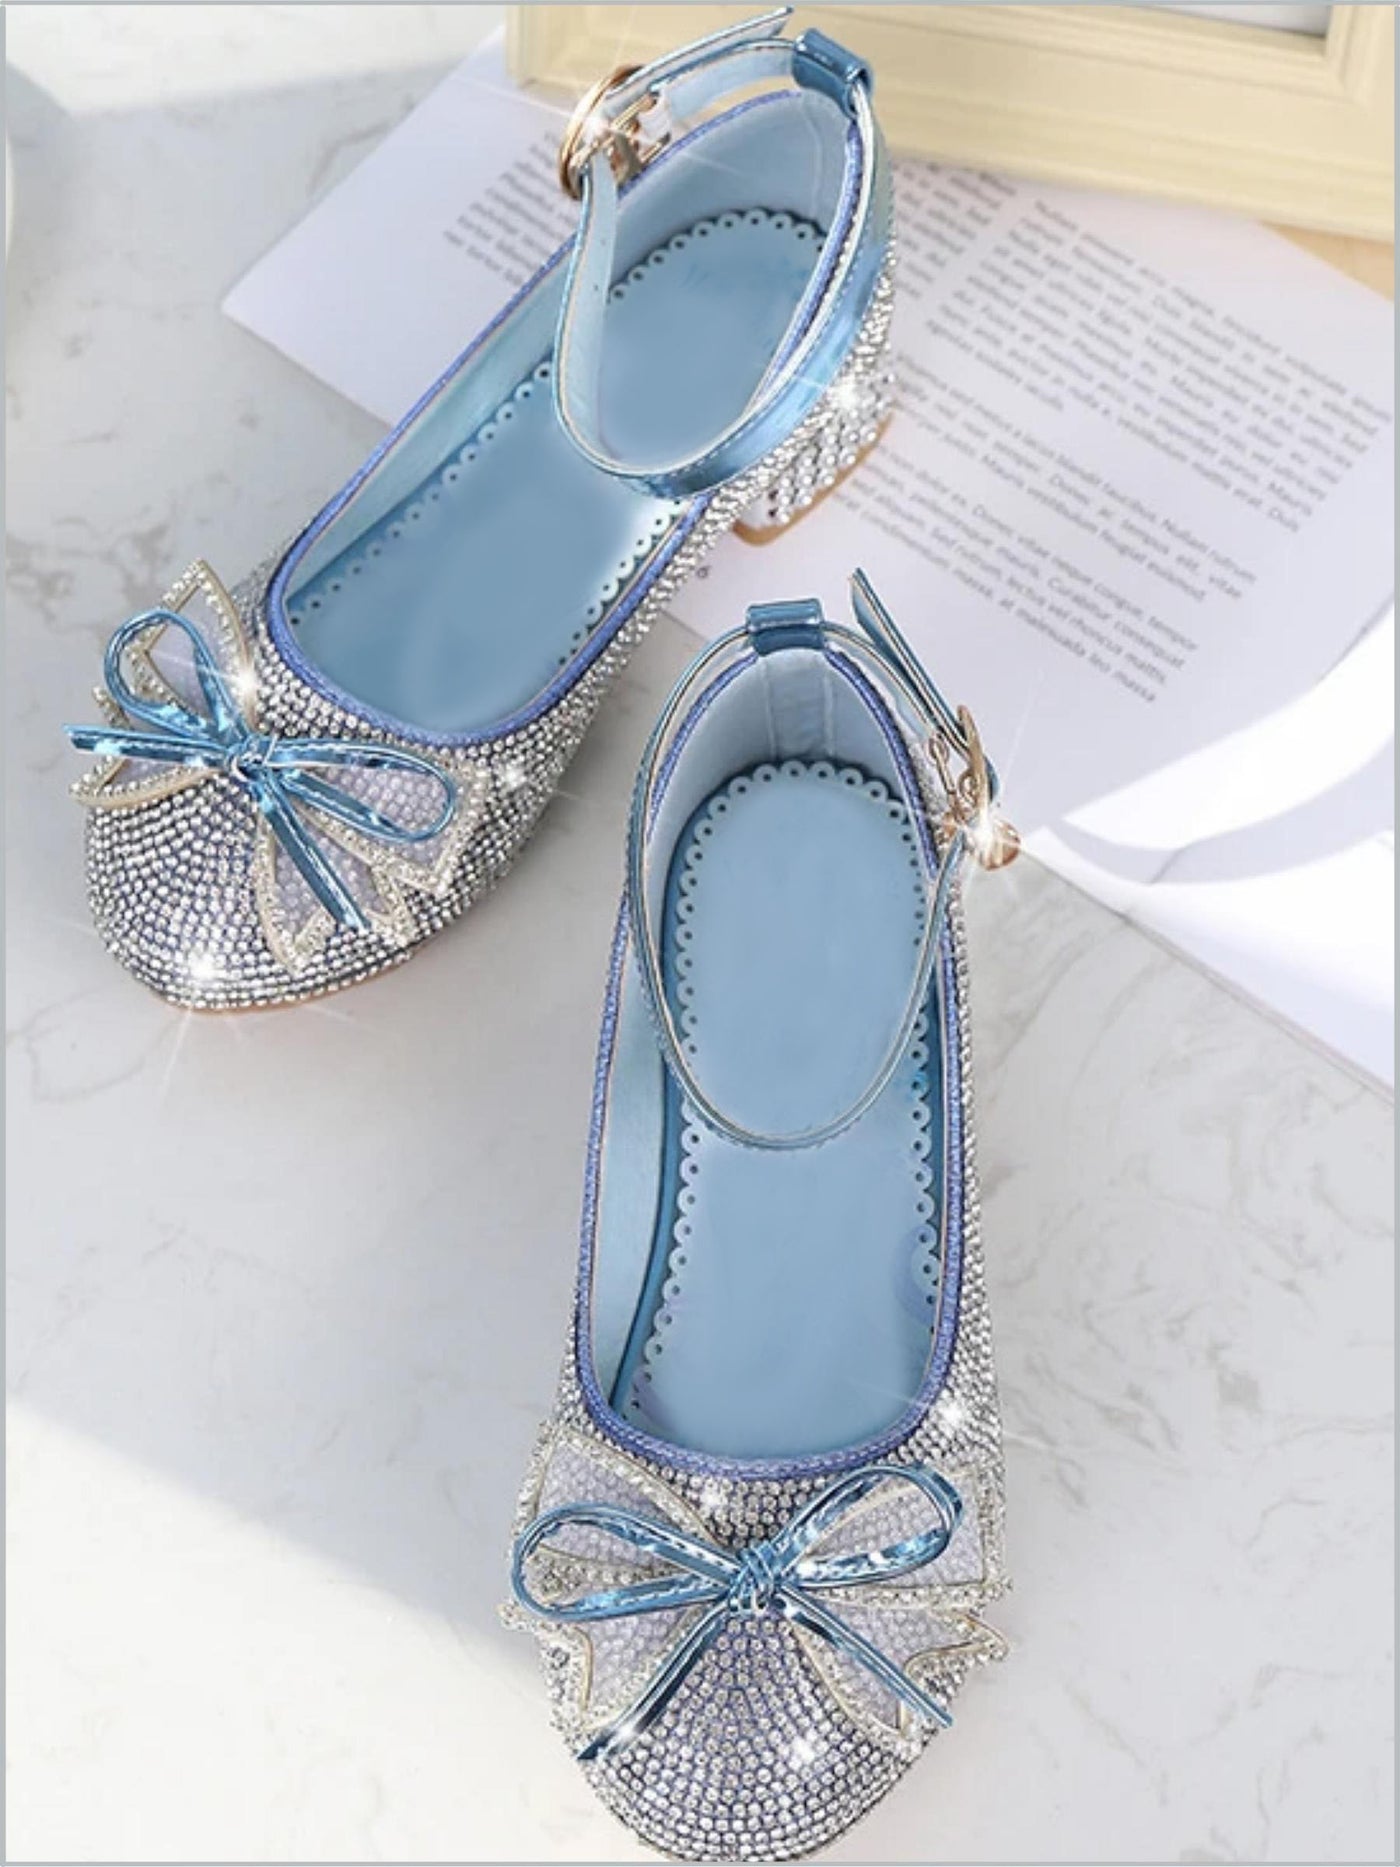 Toddler Shoes By Liv & Mia | Elsa Inspired Sparkle Princess Flats